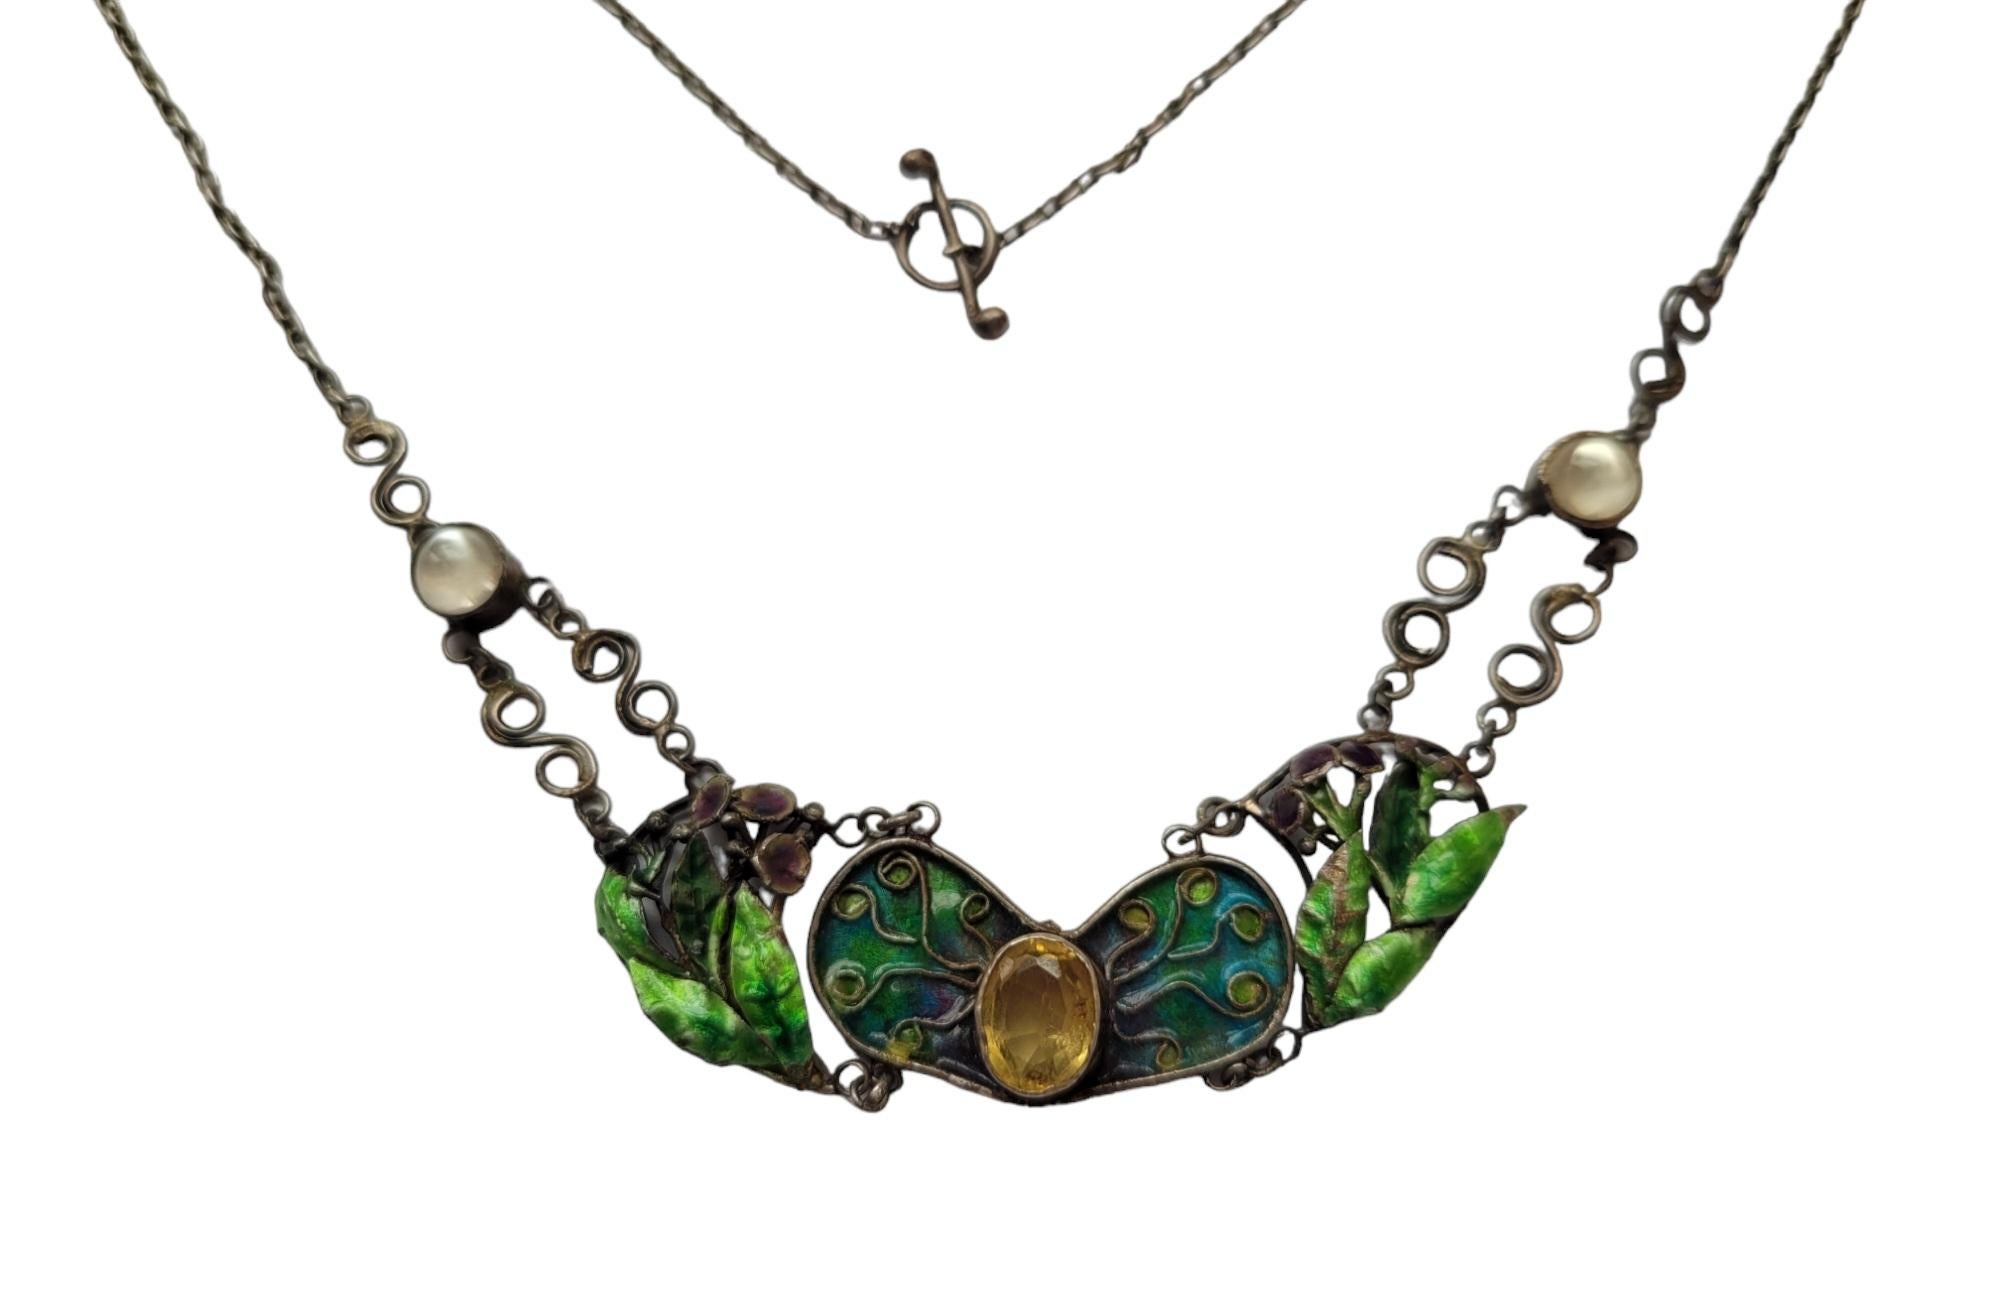 A Beautiful Arts & Crafts c.1900s Silver, Enamel, Citrine and Moonstone necklace on original chain. Necklace made in traditional Arts & Crafts style. Fully hand crafted. Rare to find! English origin.
Width 16mm.
Length of the chain including clasp